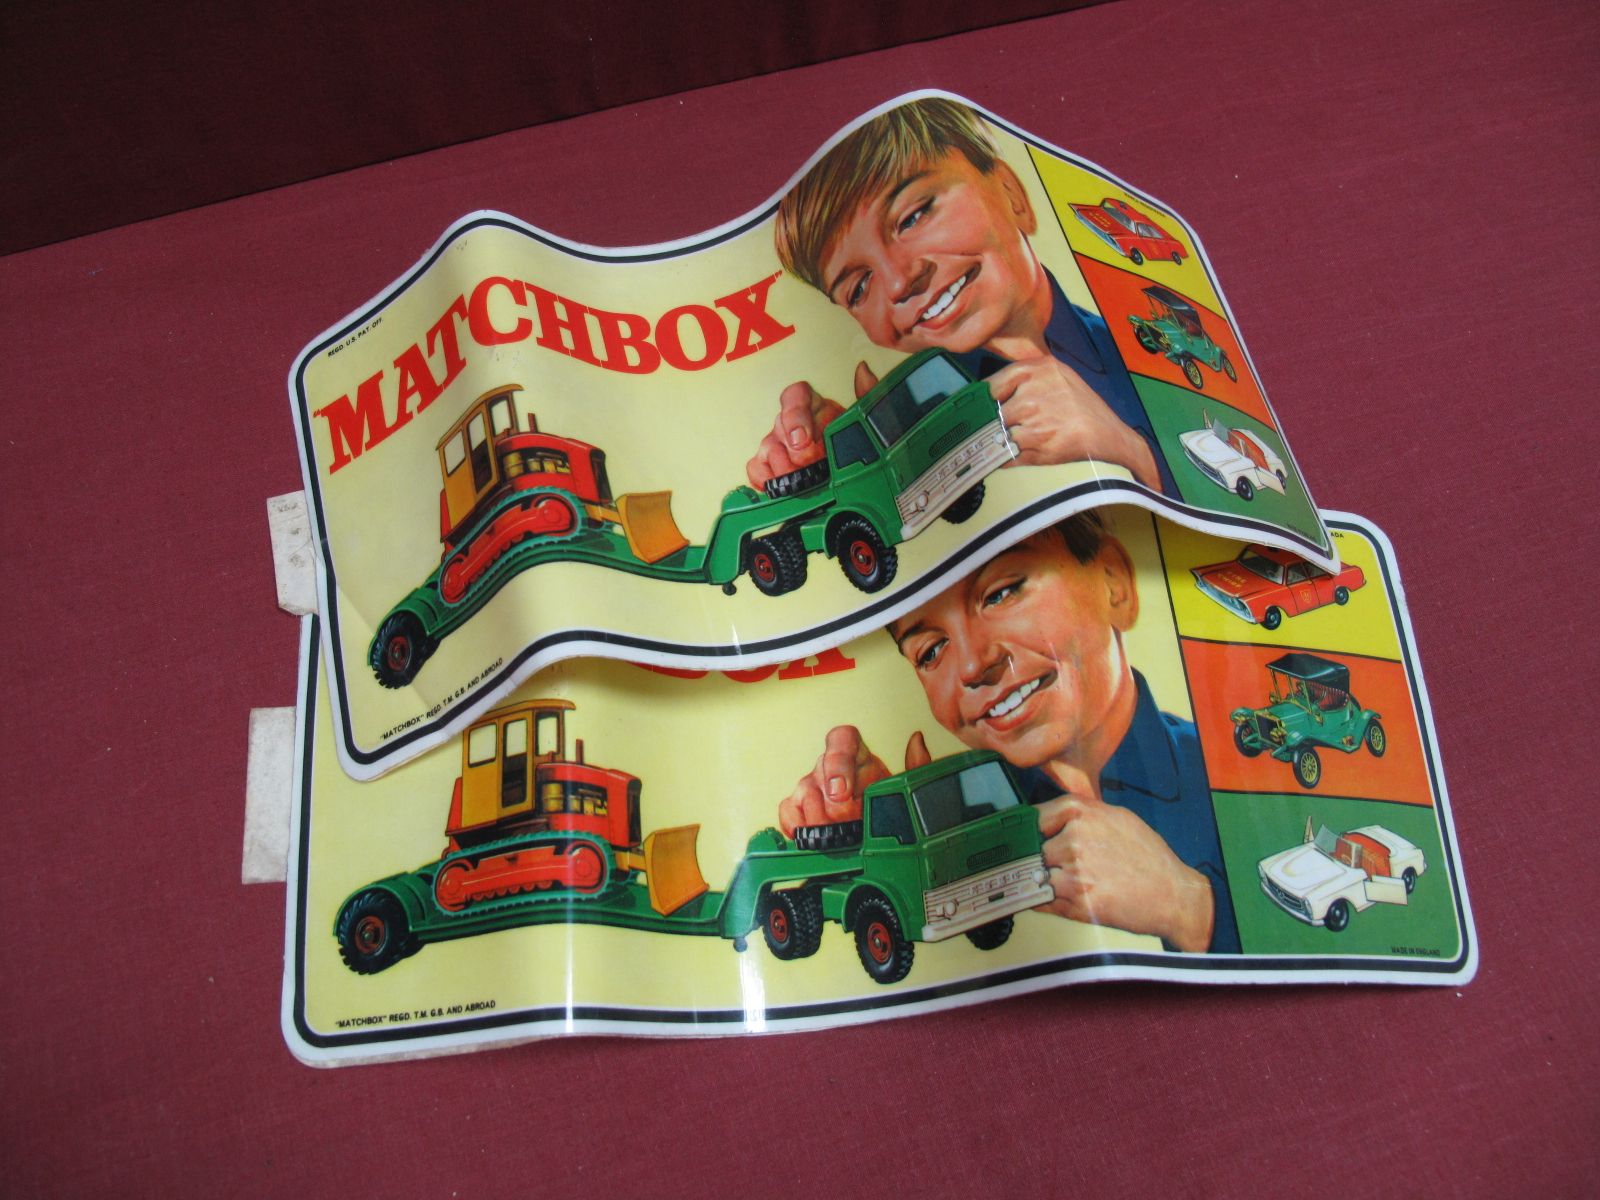 Two 1970 Original Matchbox Dealer Stickers, showing a boy with kingsize low loader, a Yesteryear and